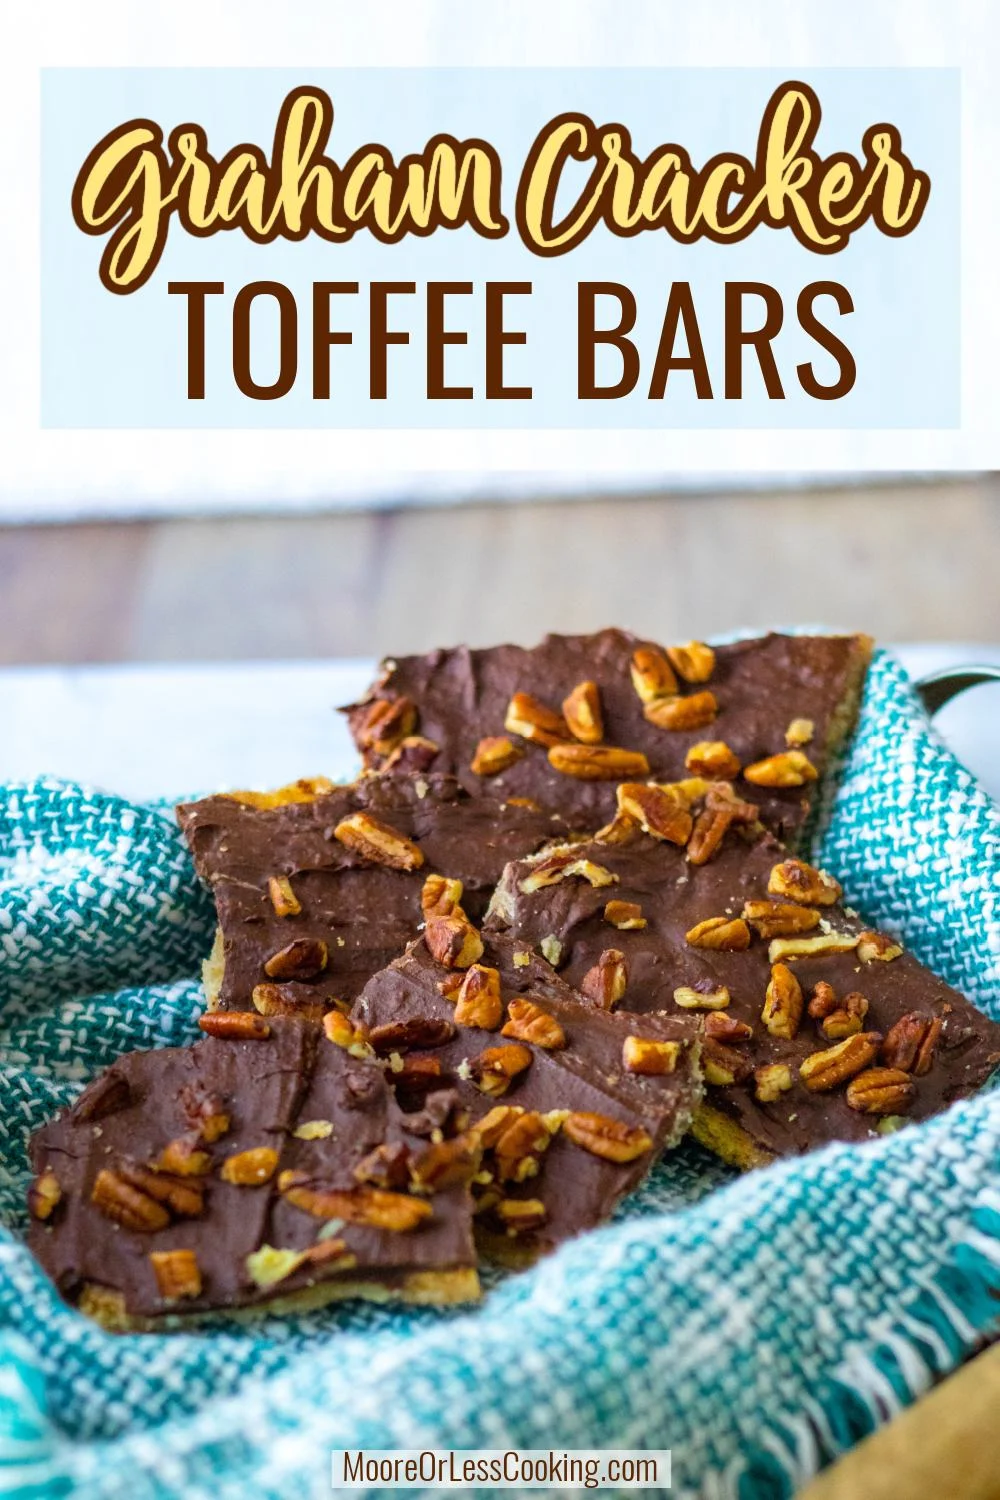 Outrageously addicting, these Graham Cracker Toffee Bars are super easy to make and always a crowd-pleaser! Crispy crackers are topped with a buttery brown sugar mixture and layered with melted chocolate and chopped pecans. They're perfect for the holidays and beyond. via @Mooreorlesscook